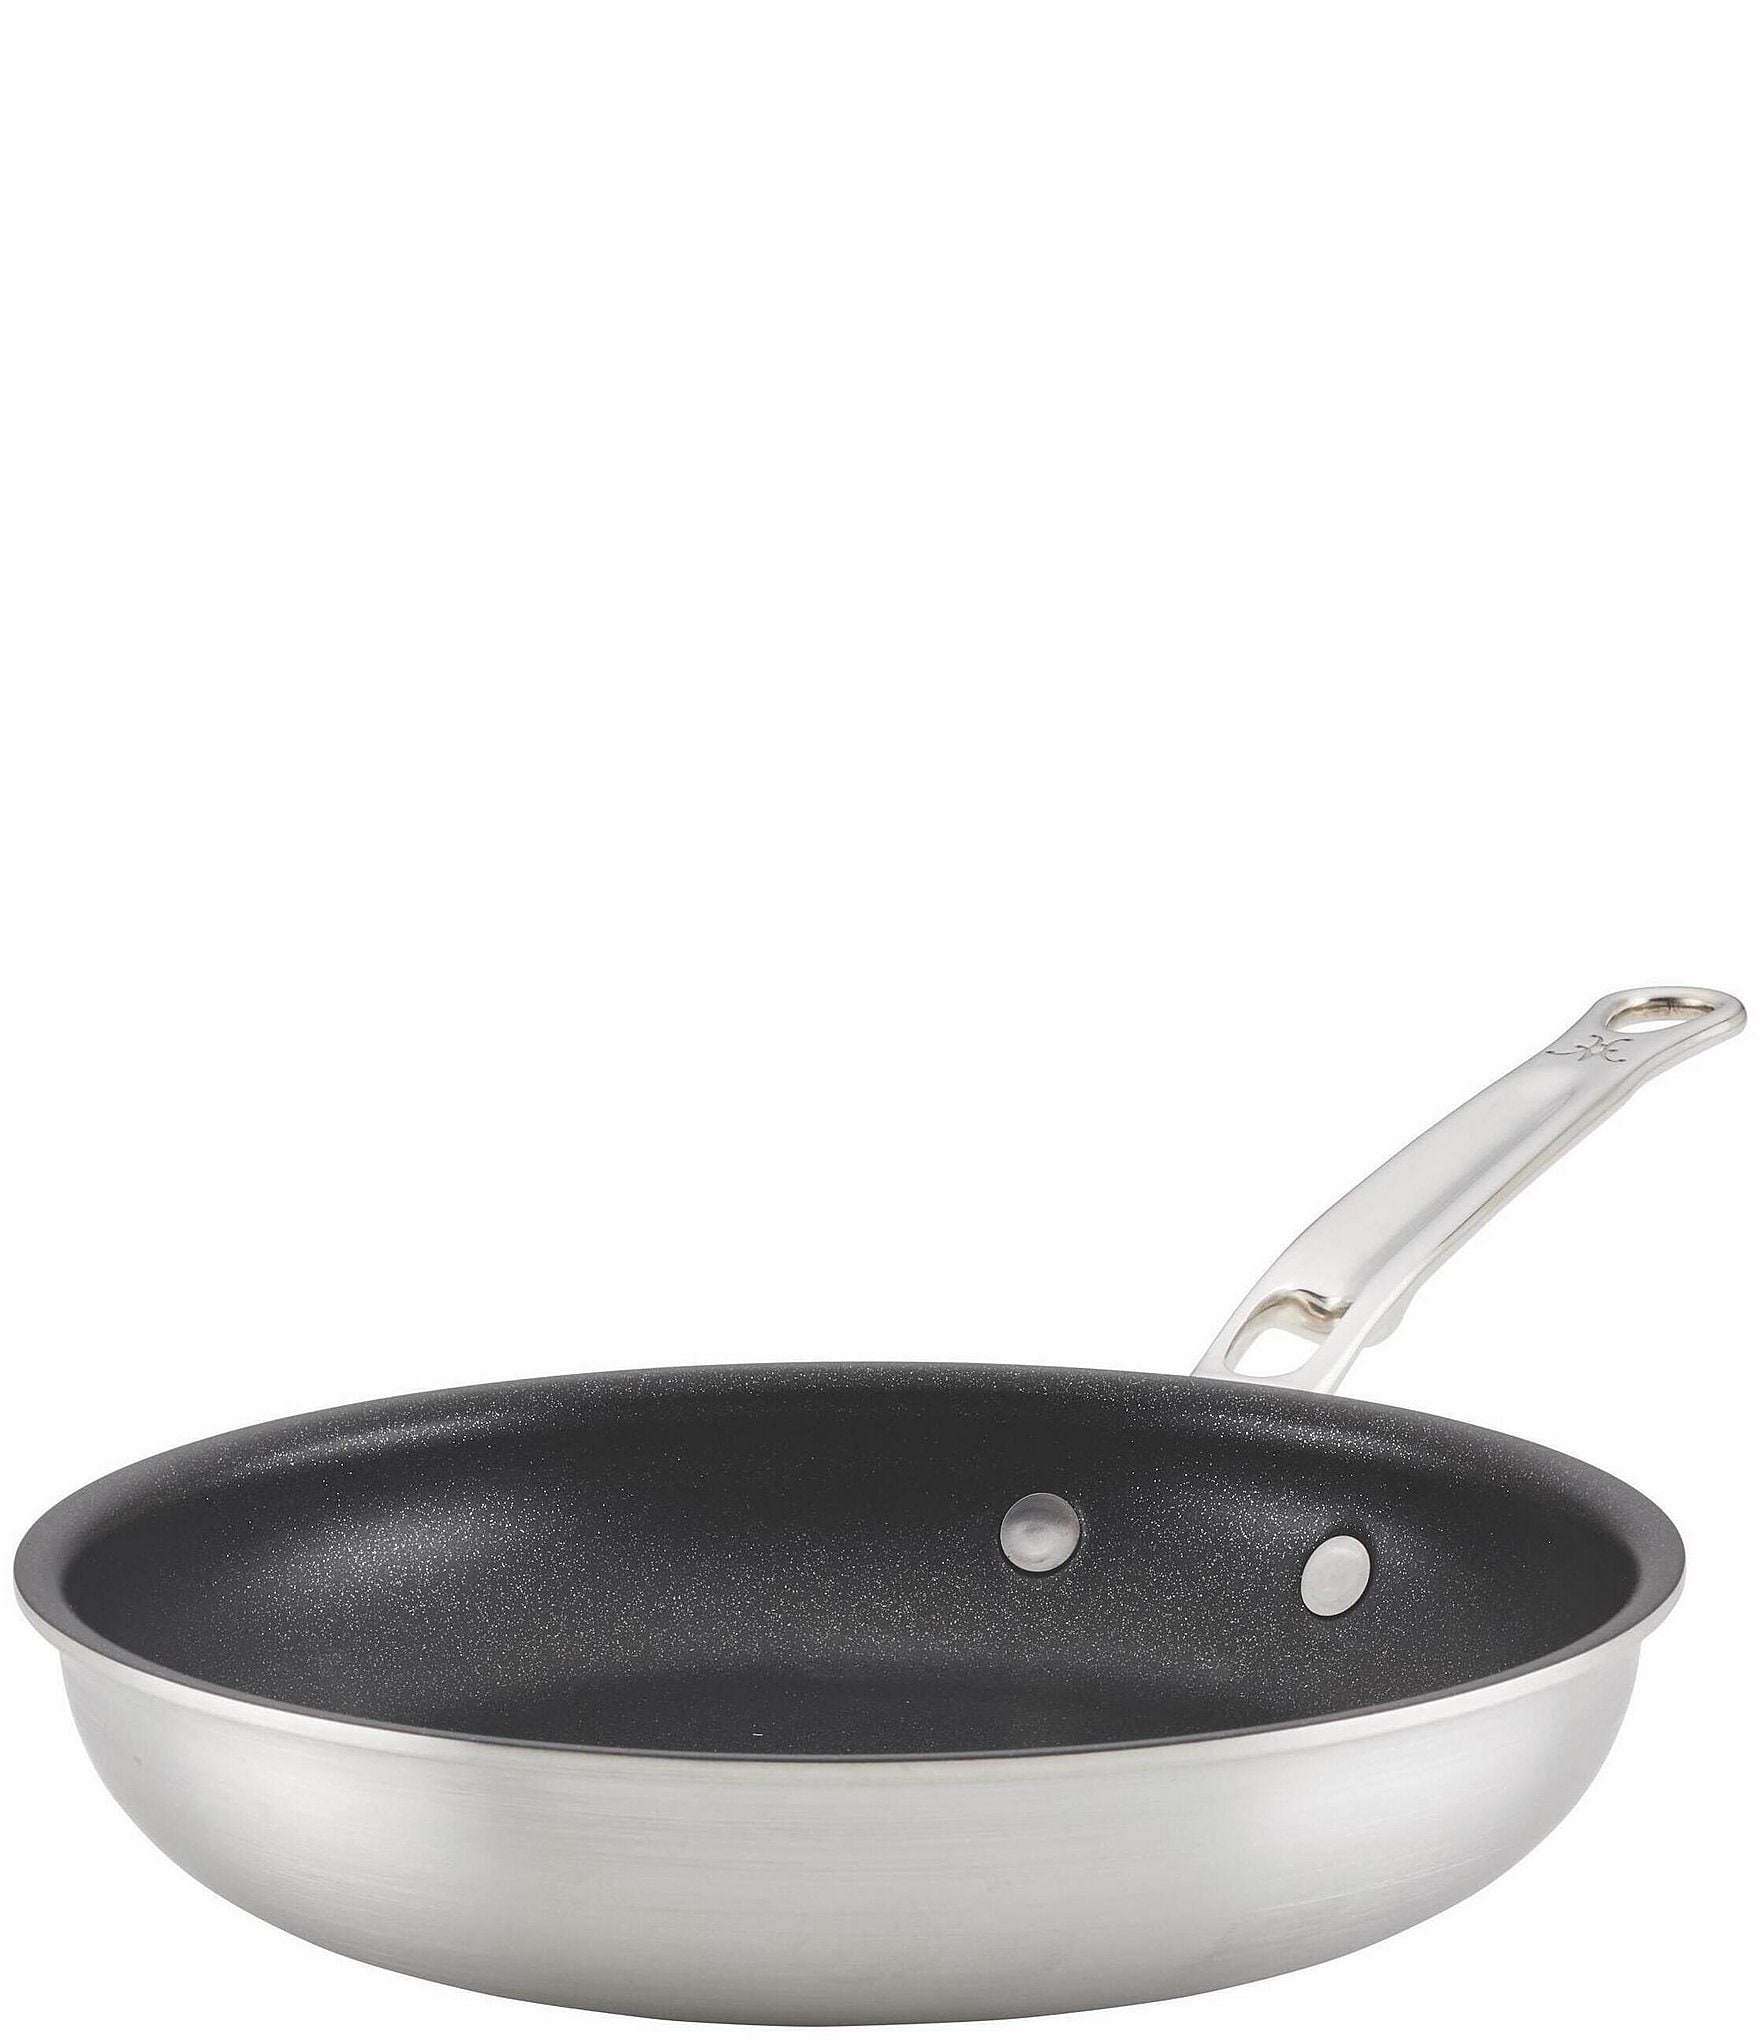 https://dimg.dillards.com/is/image/DillardsZoom/zoom/hestan-thomas-keller-insignia-tri-ply-stainless-steel-open-saute-pan-with-titum-nonstick-system-8.5/20246617_zi.jpg